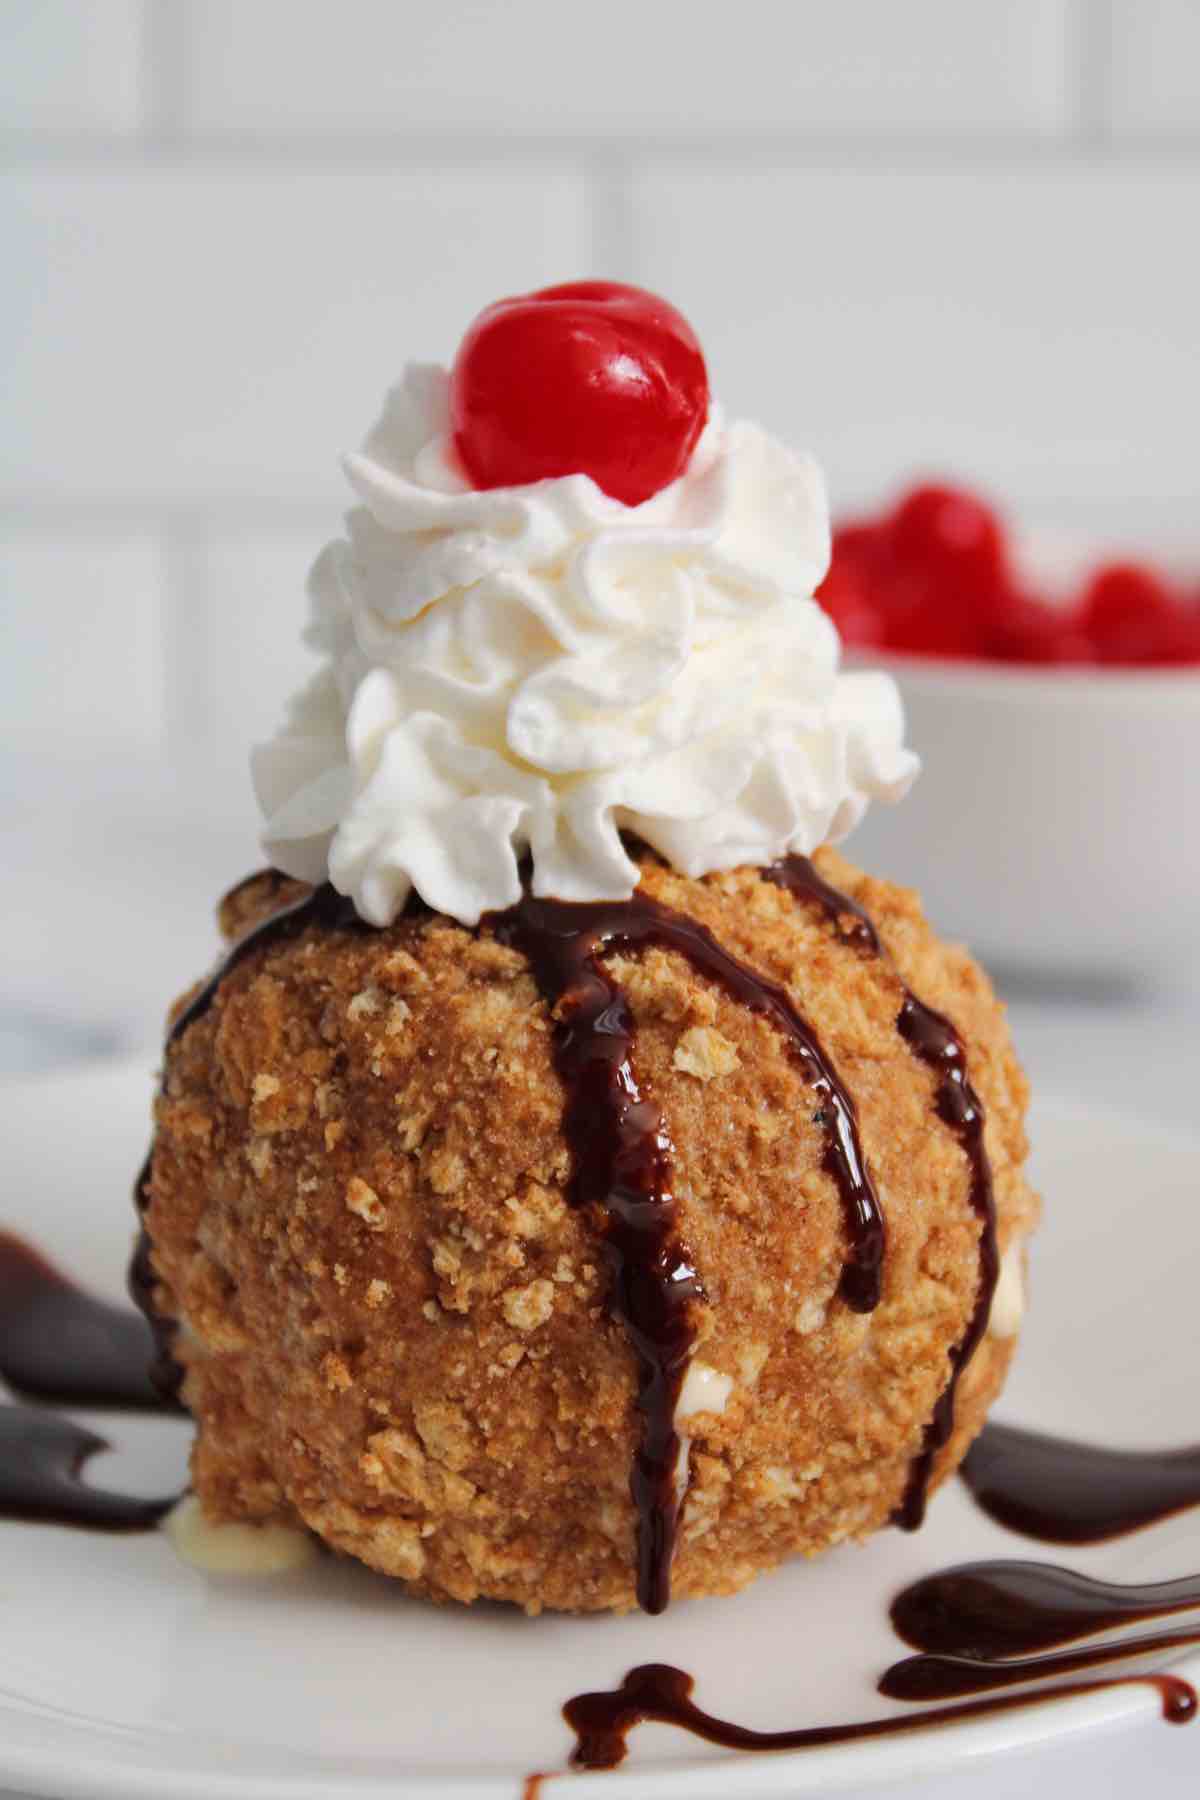 Make this easy recipe for air fryer fried ice cream with just 2 ingredients.